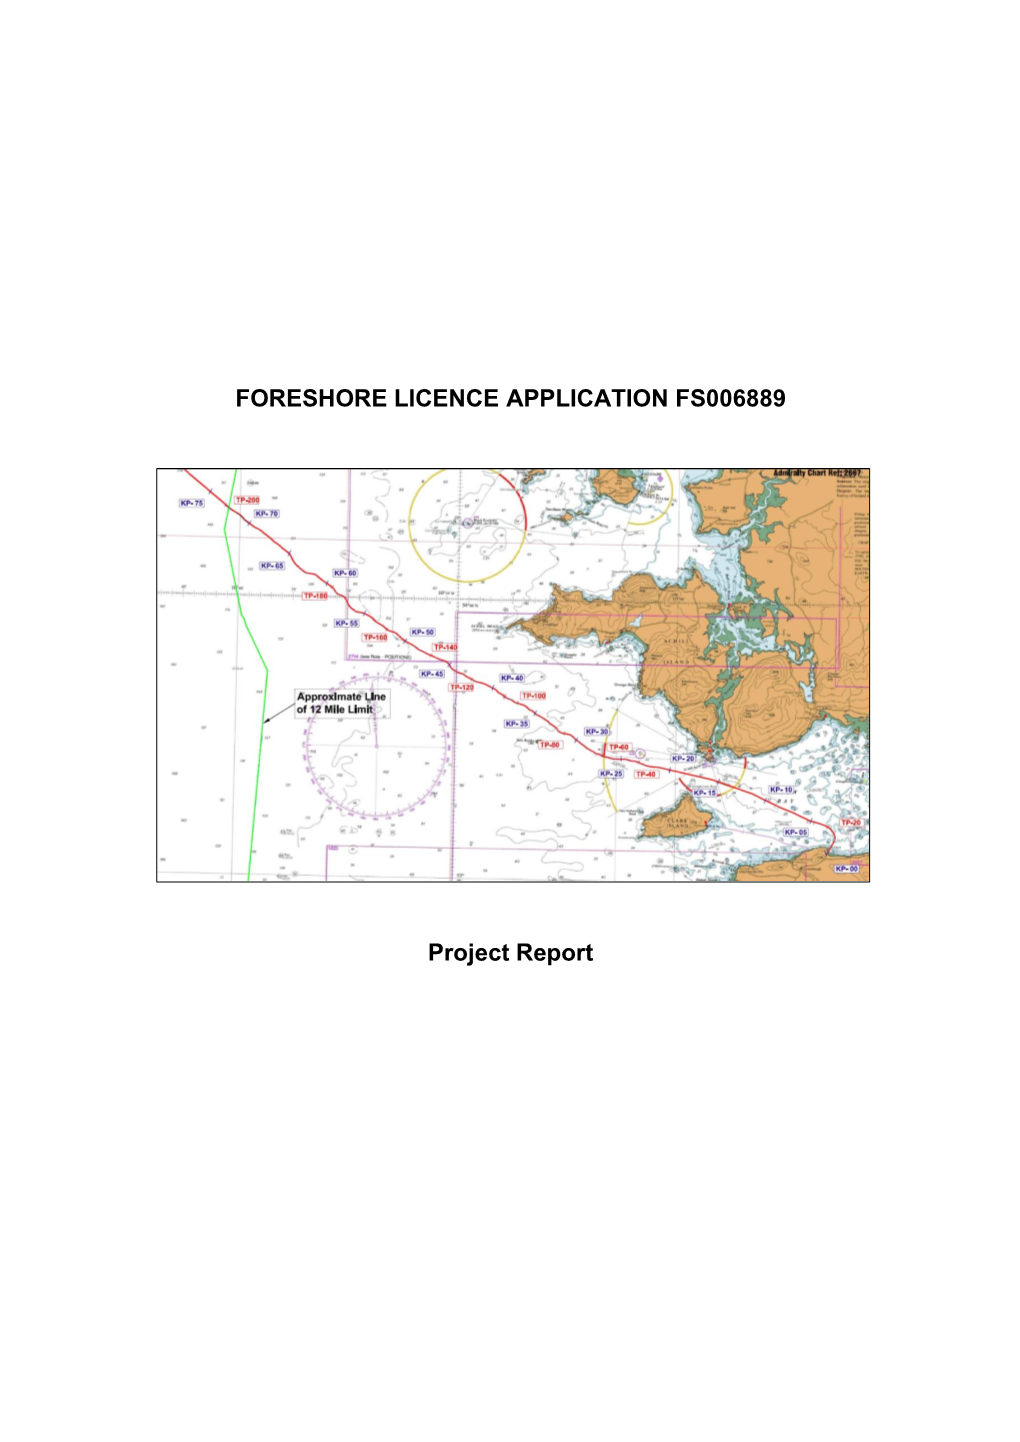 FORESHORE LICENCE APPLICATION FS006889 Project Report